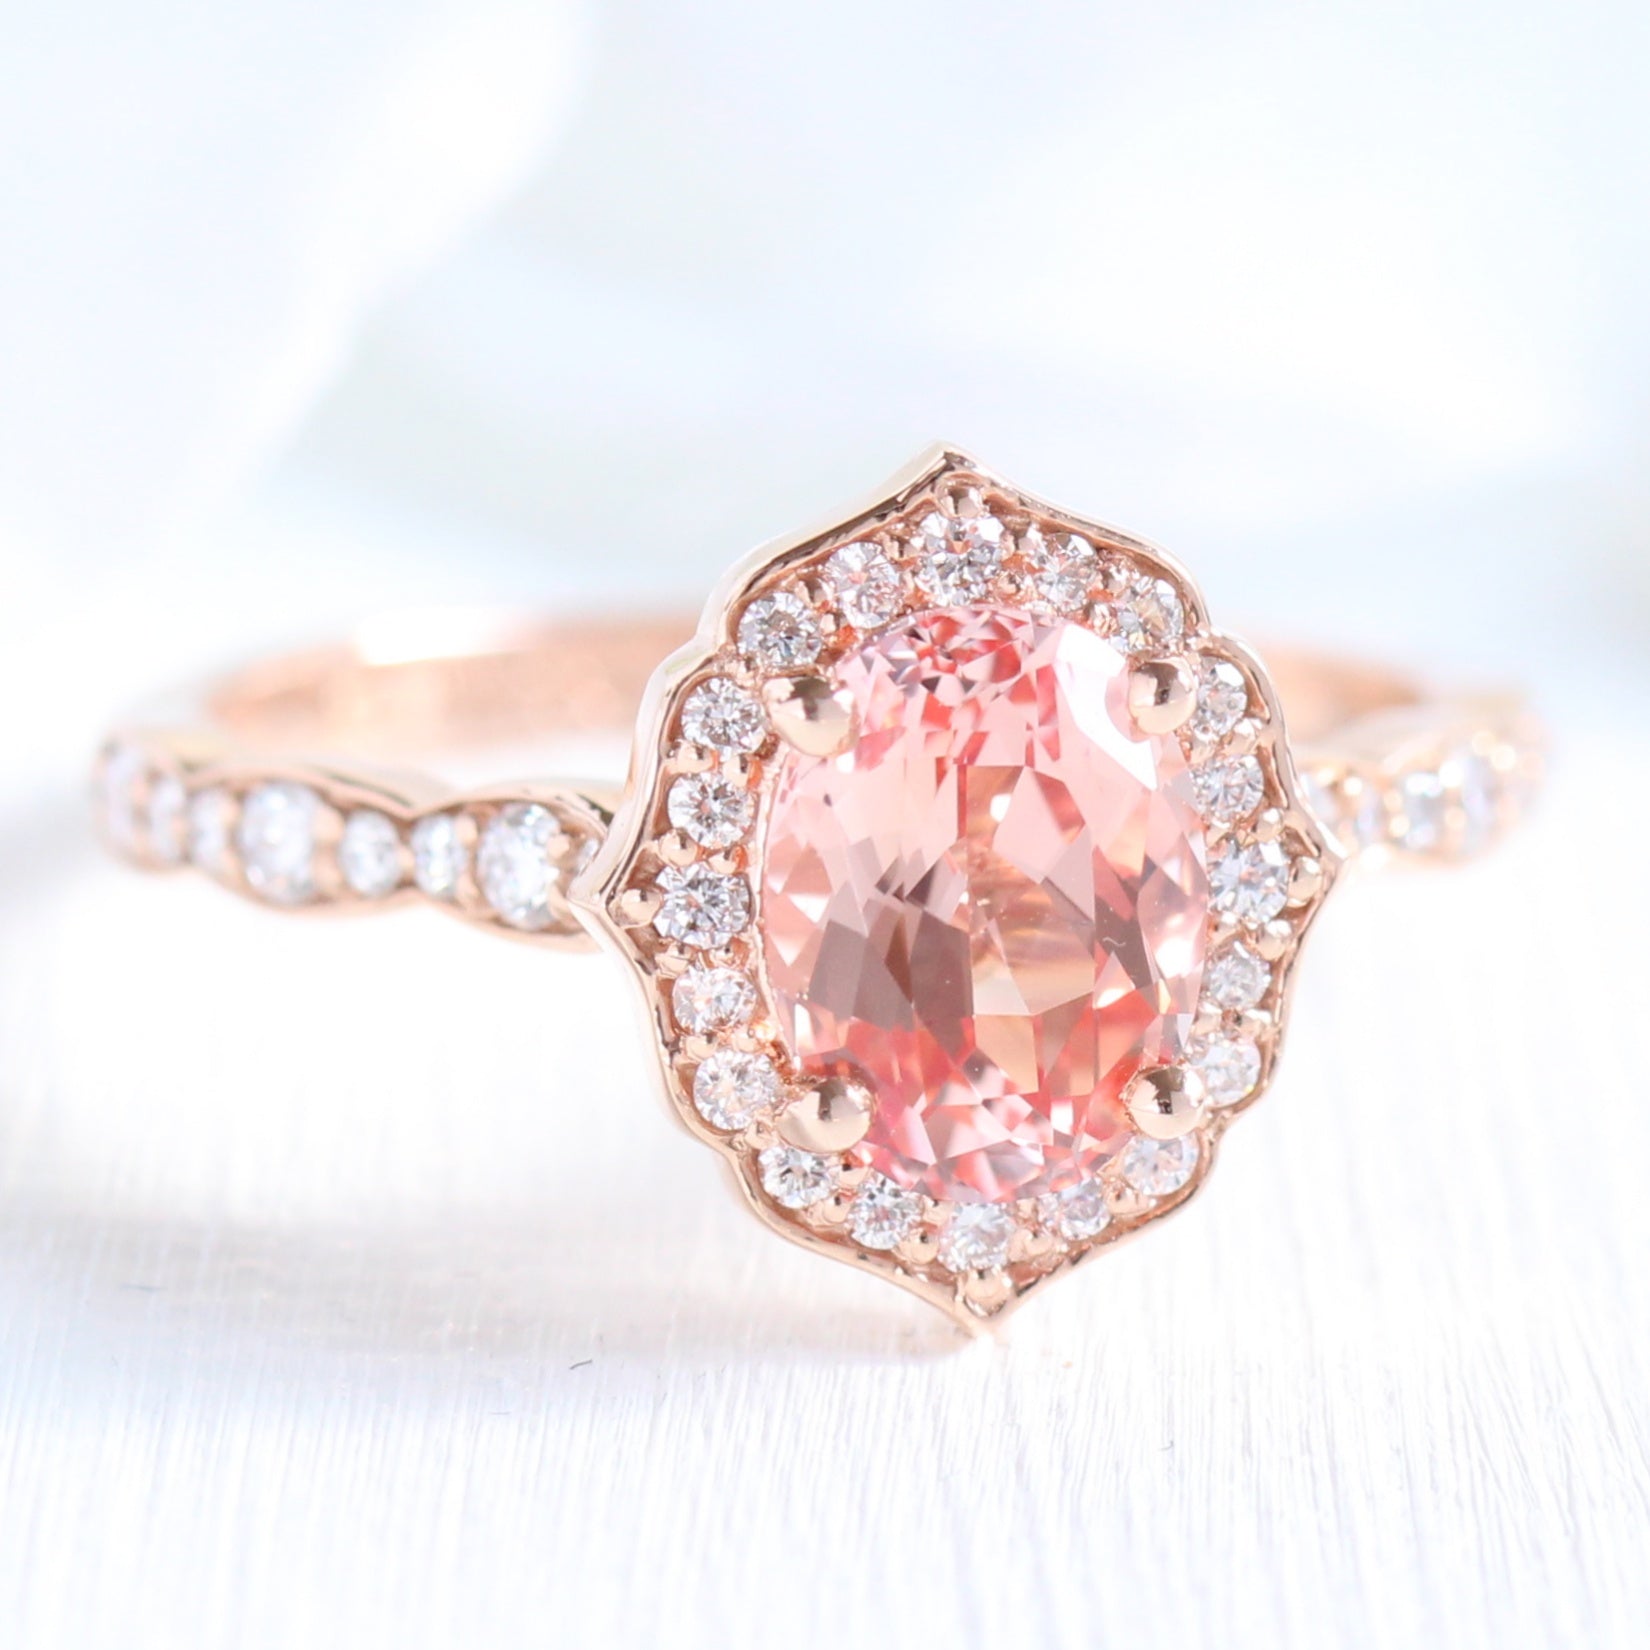 Vintage Floral Oval Ring Bridal Set w/ Champagne Peach Sapphire and Diamond